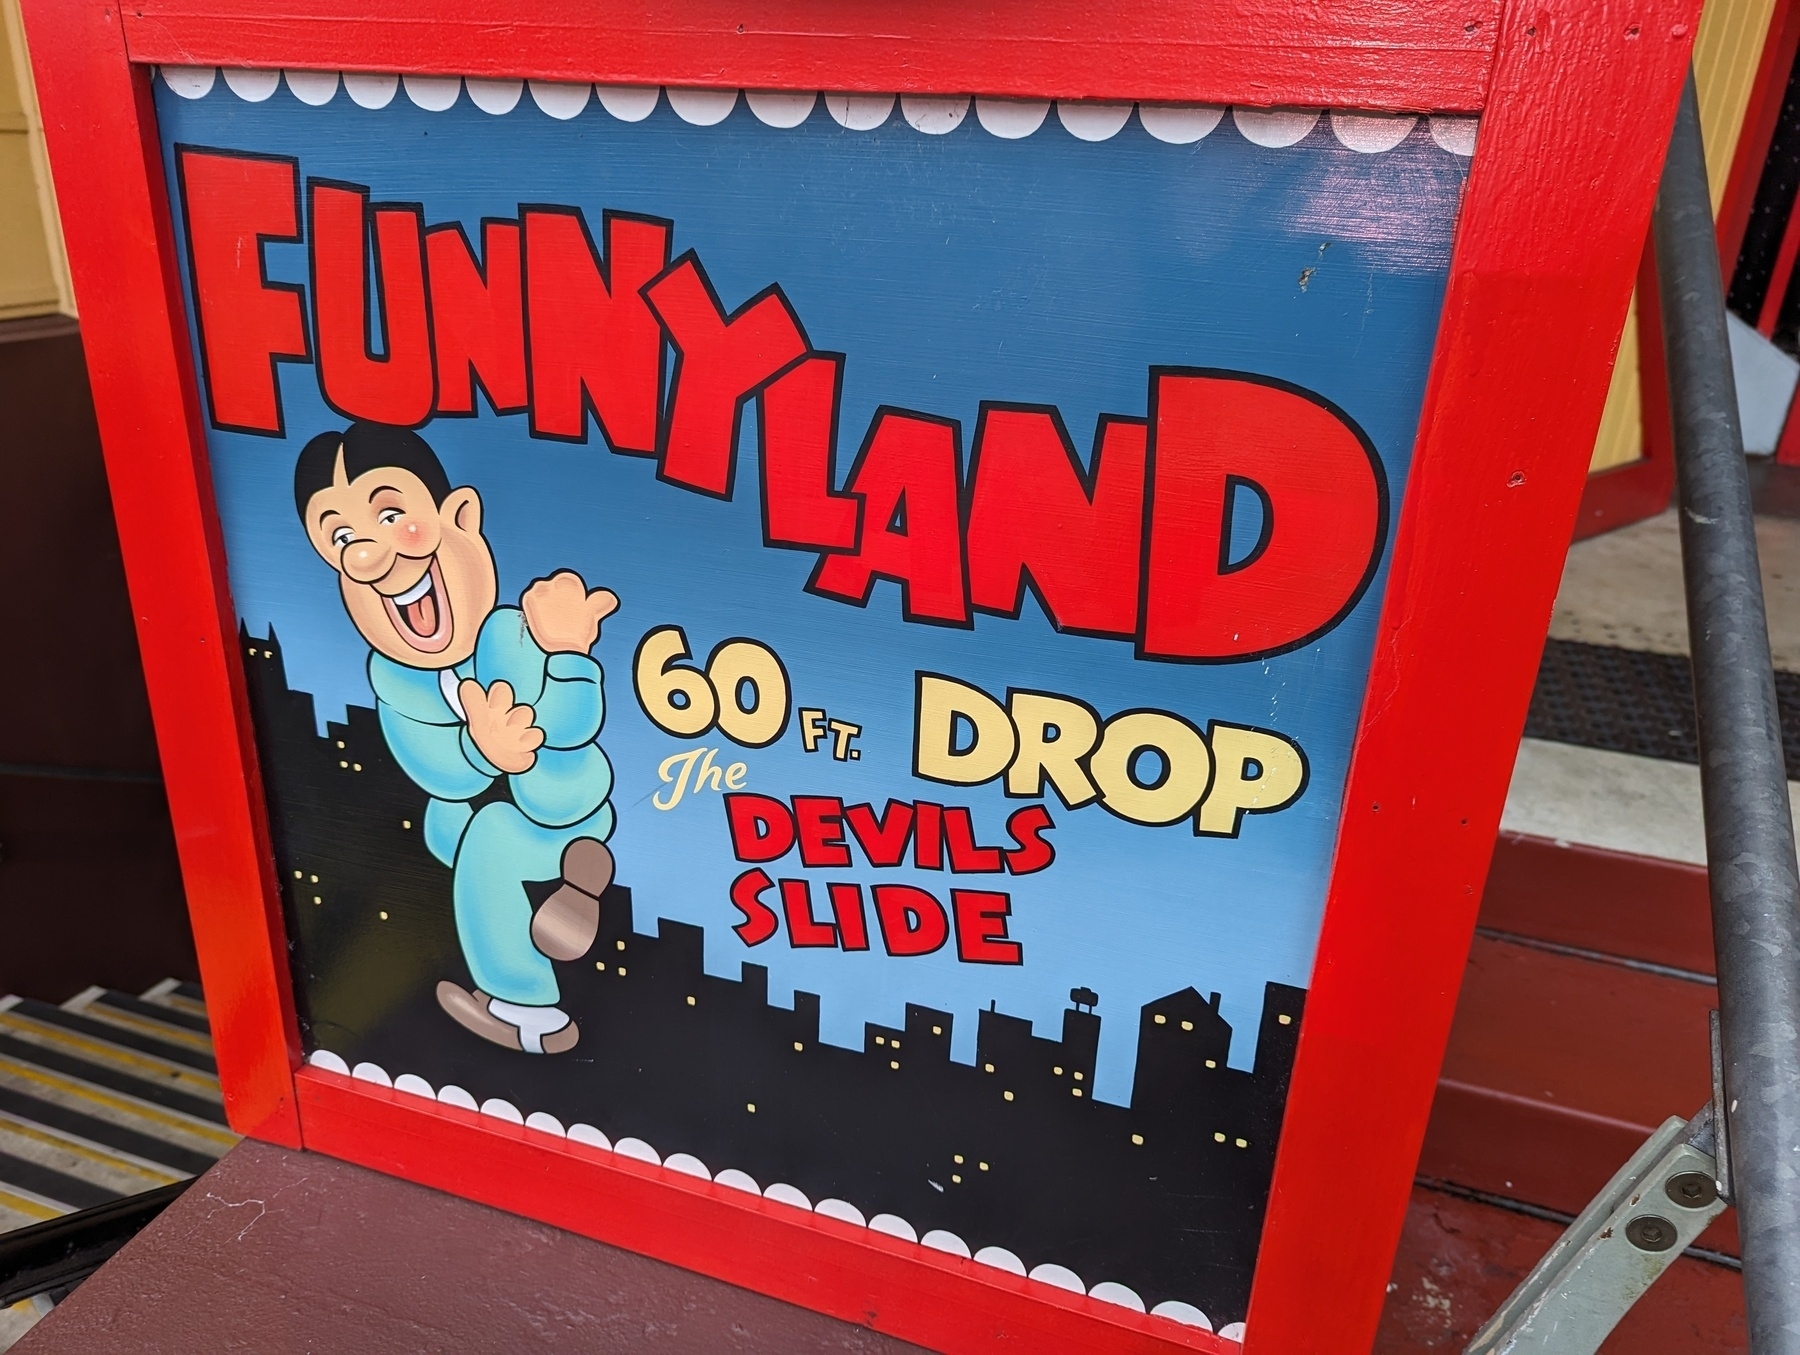 A sign at a traditional funfair promotes Funnyland and the Devil's slide.